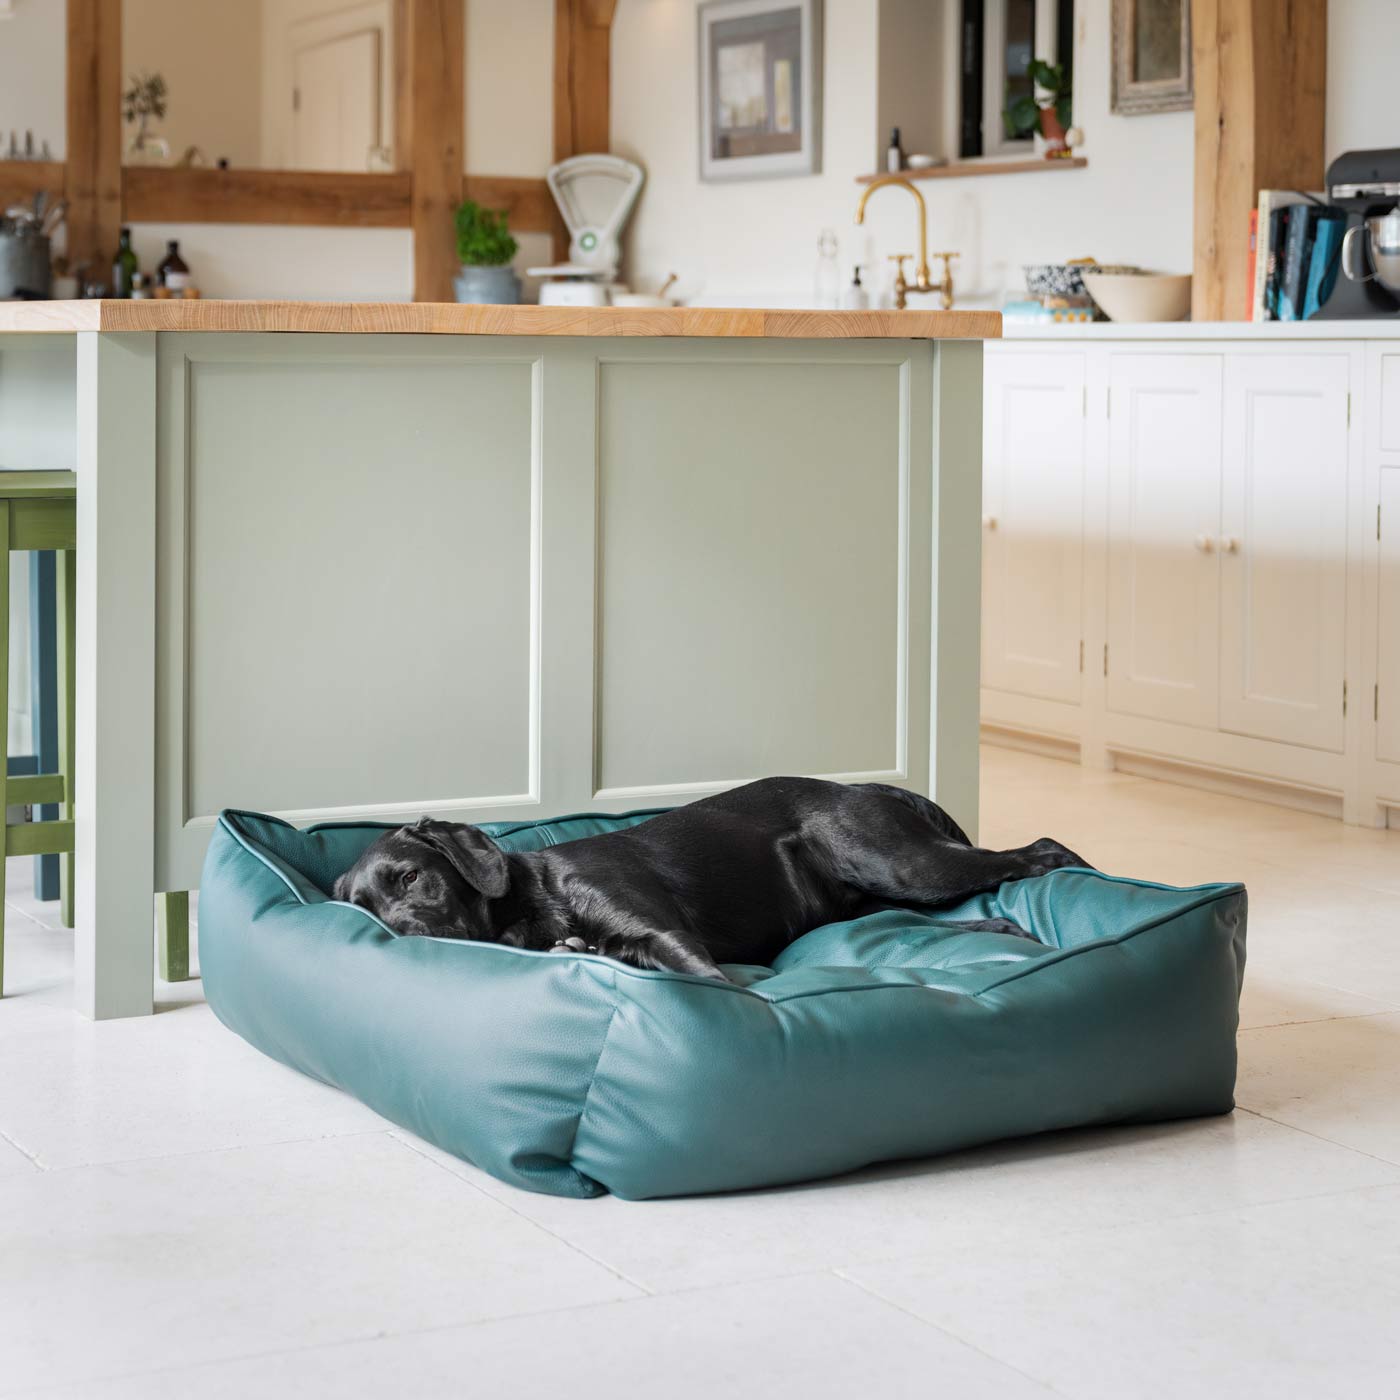 Luxury Handmade Box Bed in Rhino Tough Faux Leather, in Forest Green, Perfect For Your Pets Nap Time! Available To Personalise at Lords & Labradors